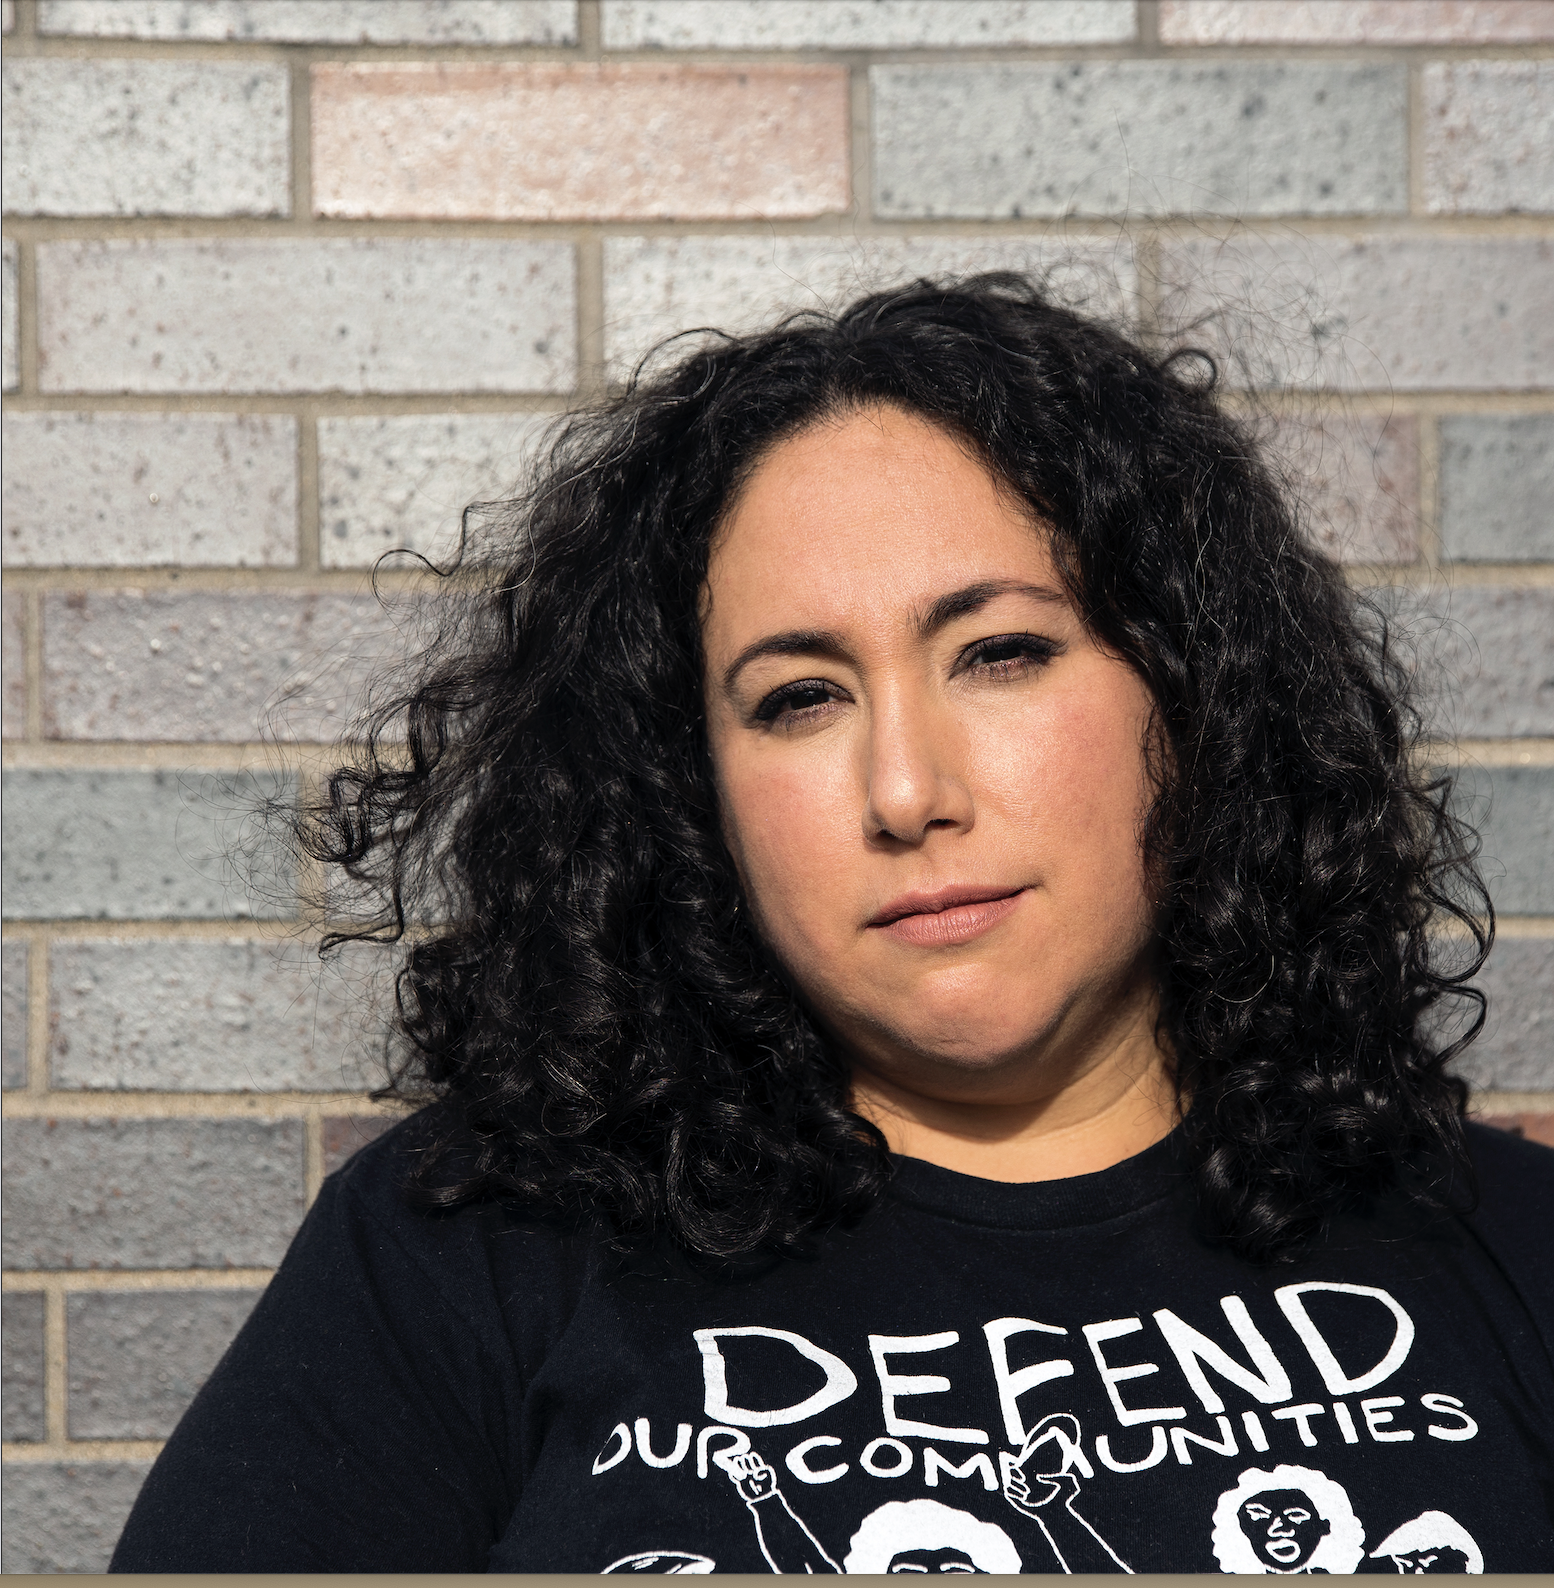 headshot of person with light skin tone and dark curly hair, wearing a shirt that says "defend our communities"